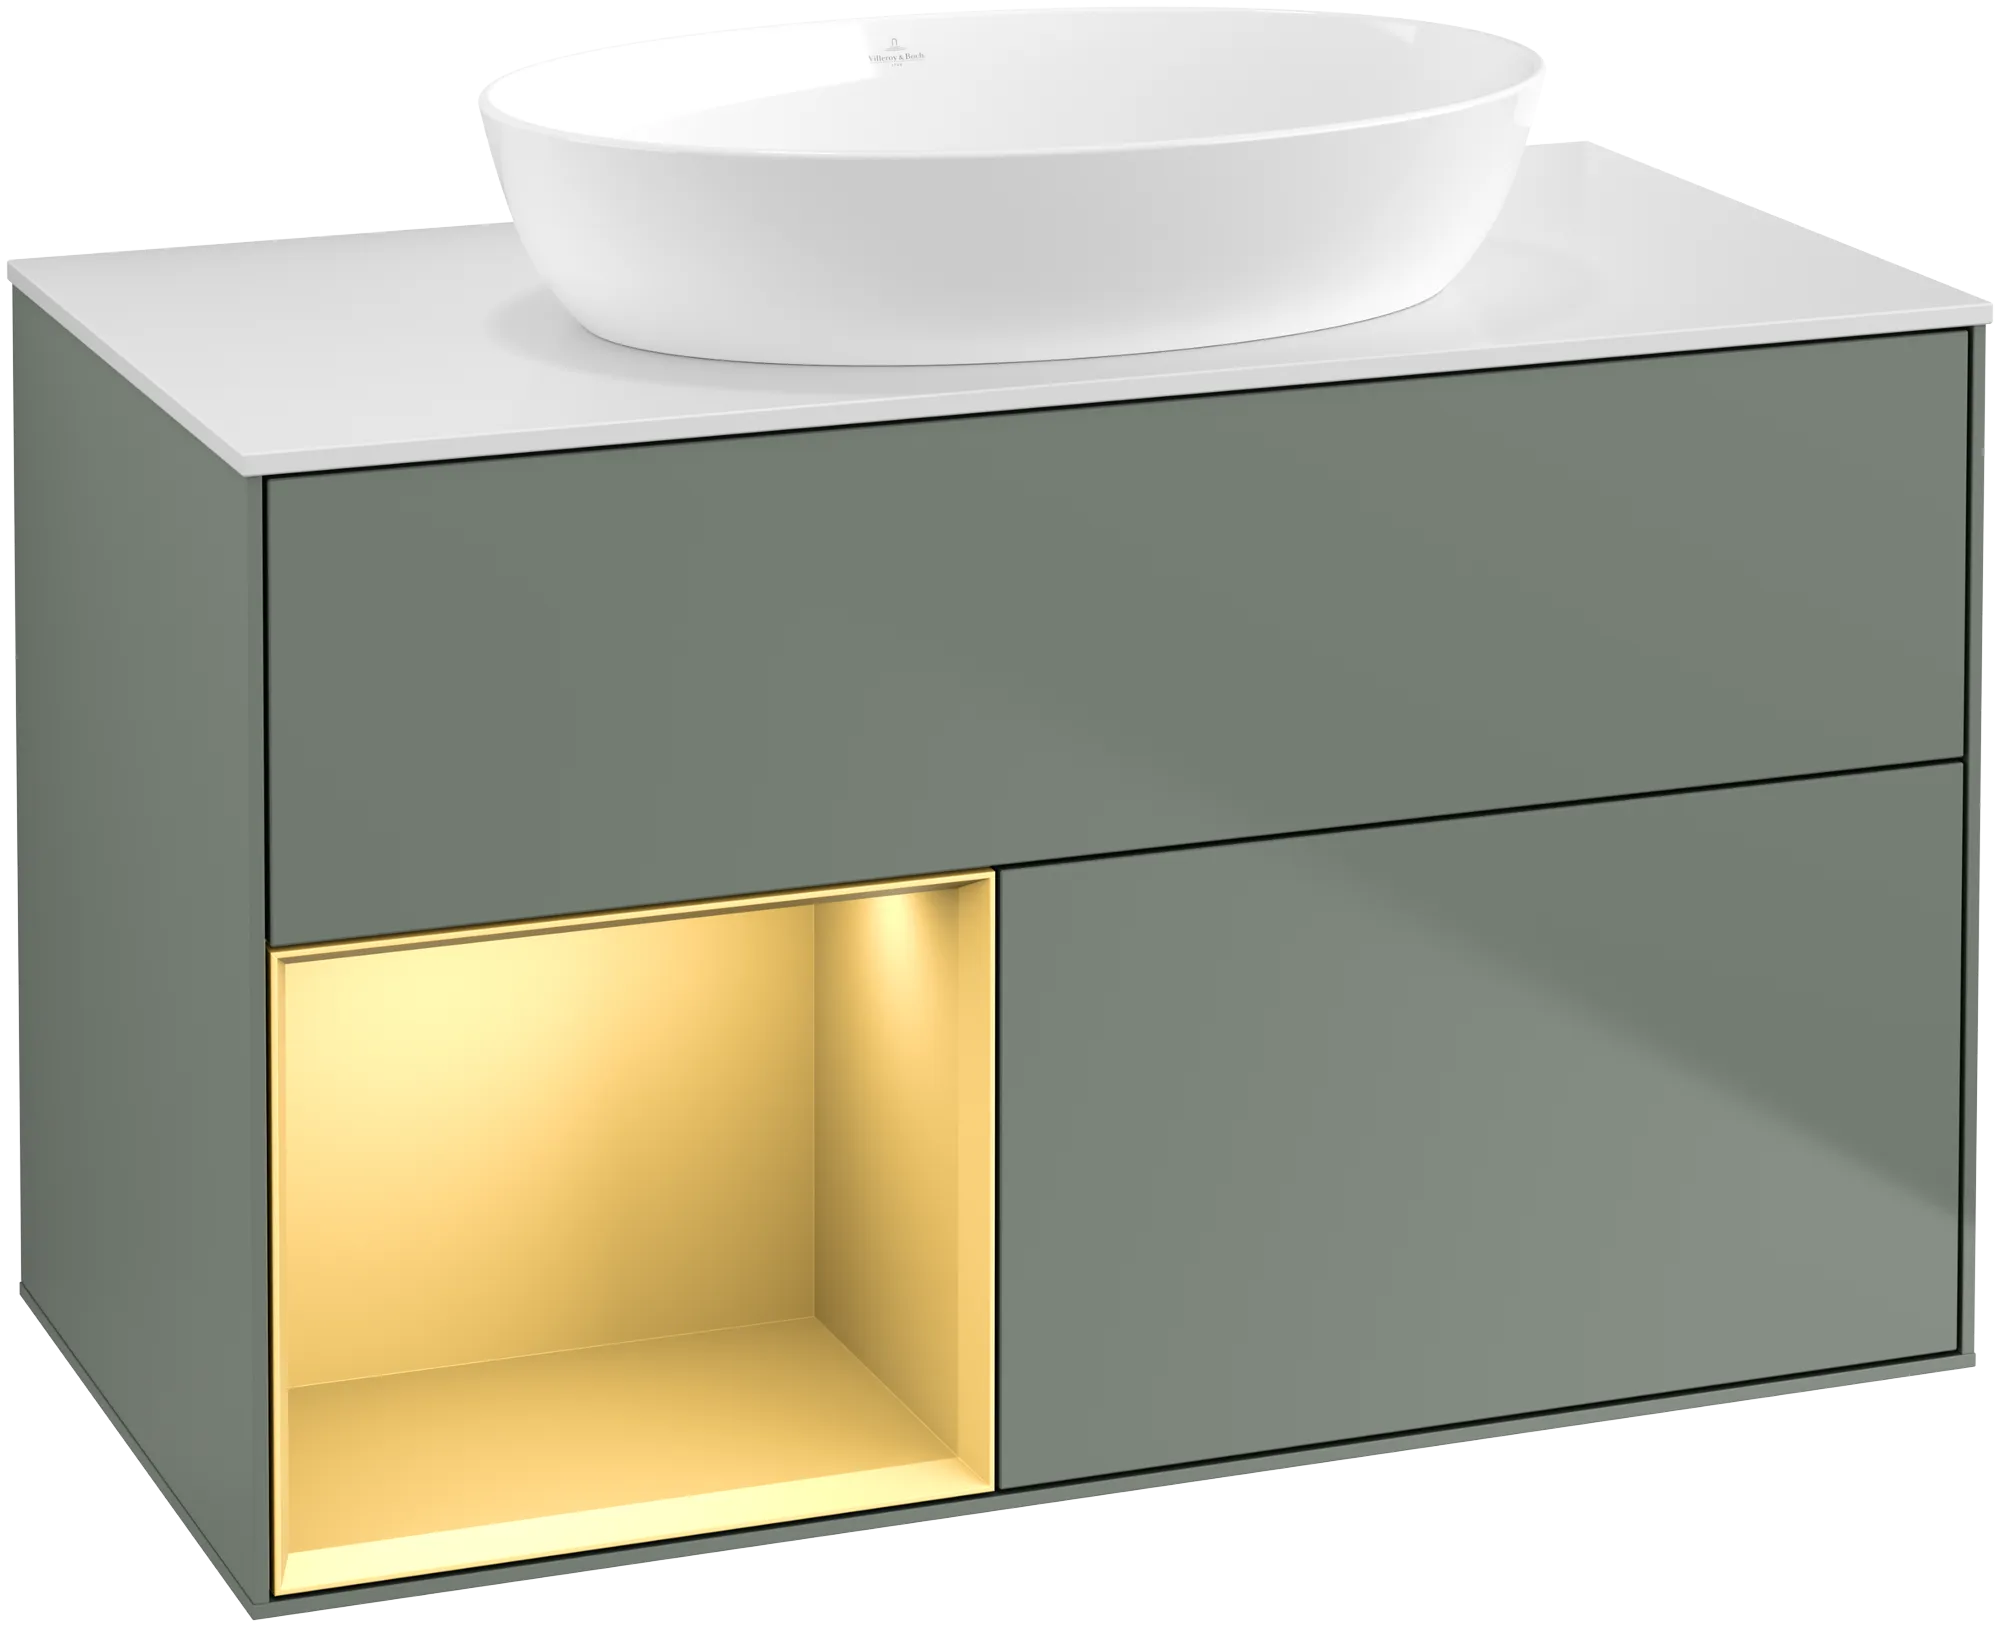 Picture of VILLEROY BOCH Finion Vanity unit, with lighting, 2 pull-out compartments, 1000 x 603 x 501 mm, Olive Matt Lacquer / Gold Matt Lacquer / Glass White Matt #GA11HFGM